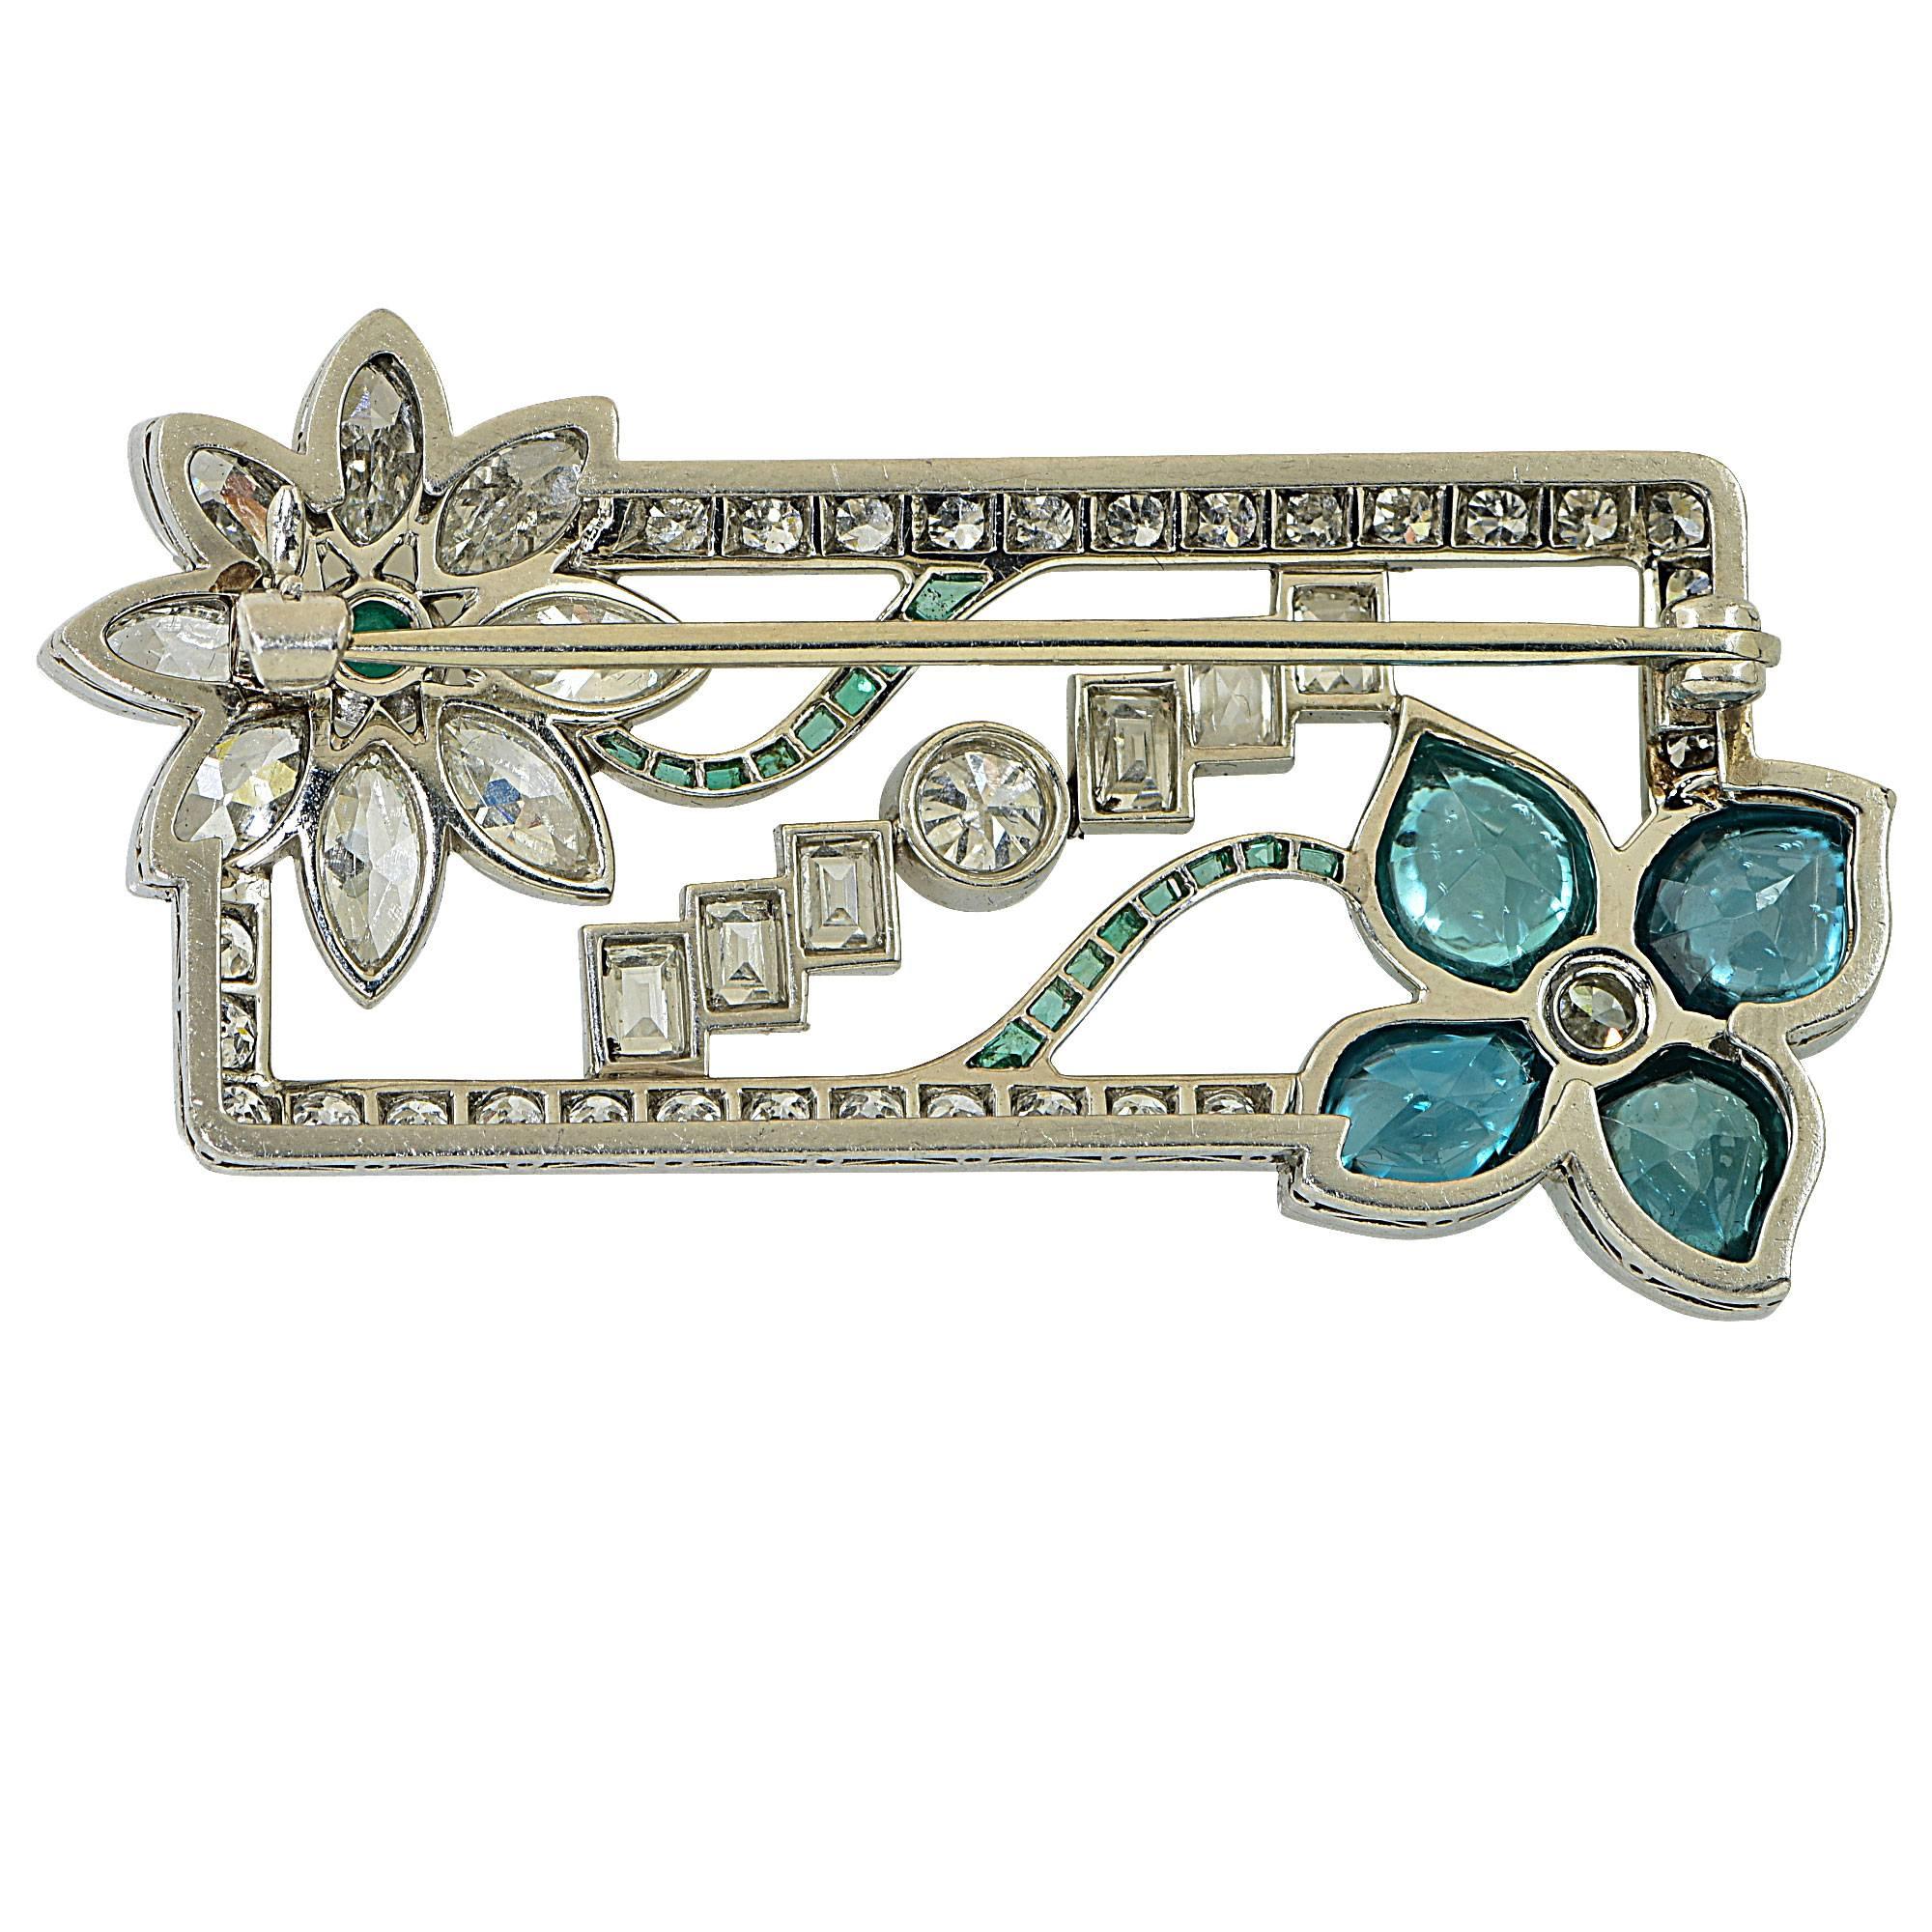 Platinum Deco brooch featuring approximately 5cts of European, baguette and marquise cut diamonds, G color VS clarity. Accented by emerald and zircon cabochons.

It is stamped and tested as platinum.
The metal weight is 13.06 grams.

This